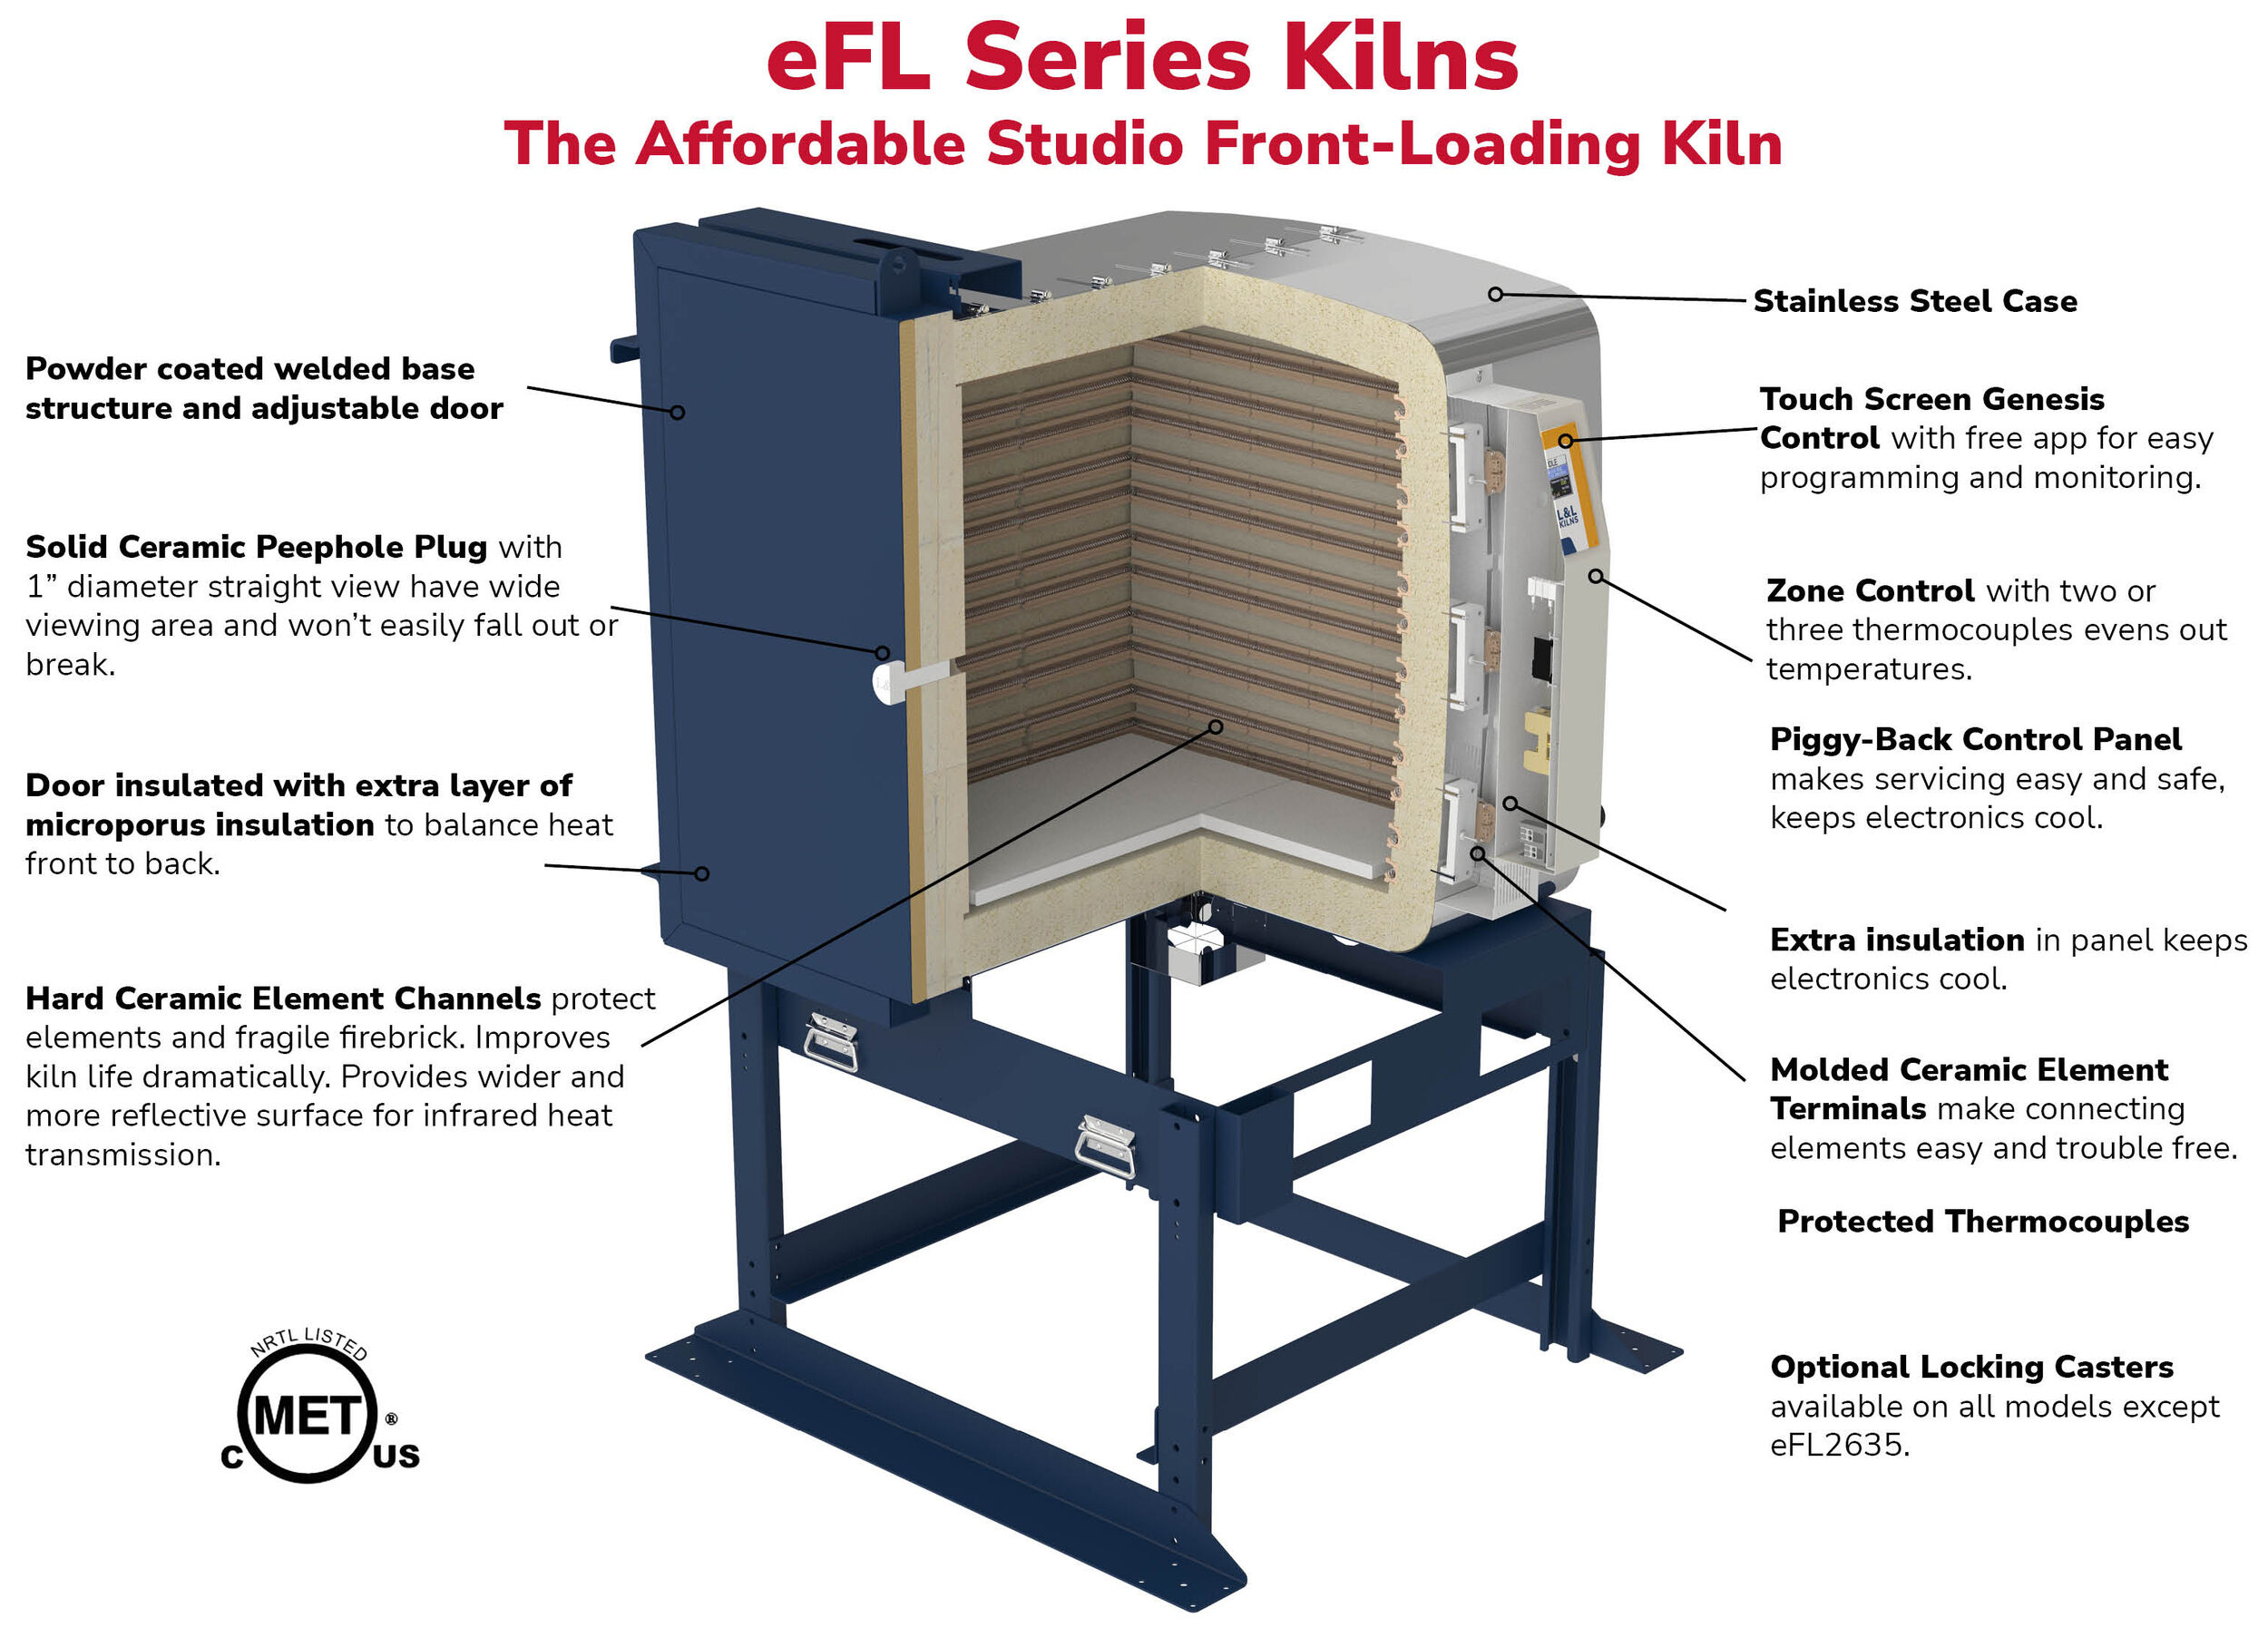 L&L eFL Series Front-Loading kiln for ceramic studios and schools feature sustainability maintenance features like protected firebrick and thermocouples, balanced heating and zone control, digital controls, cool-firing control panel